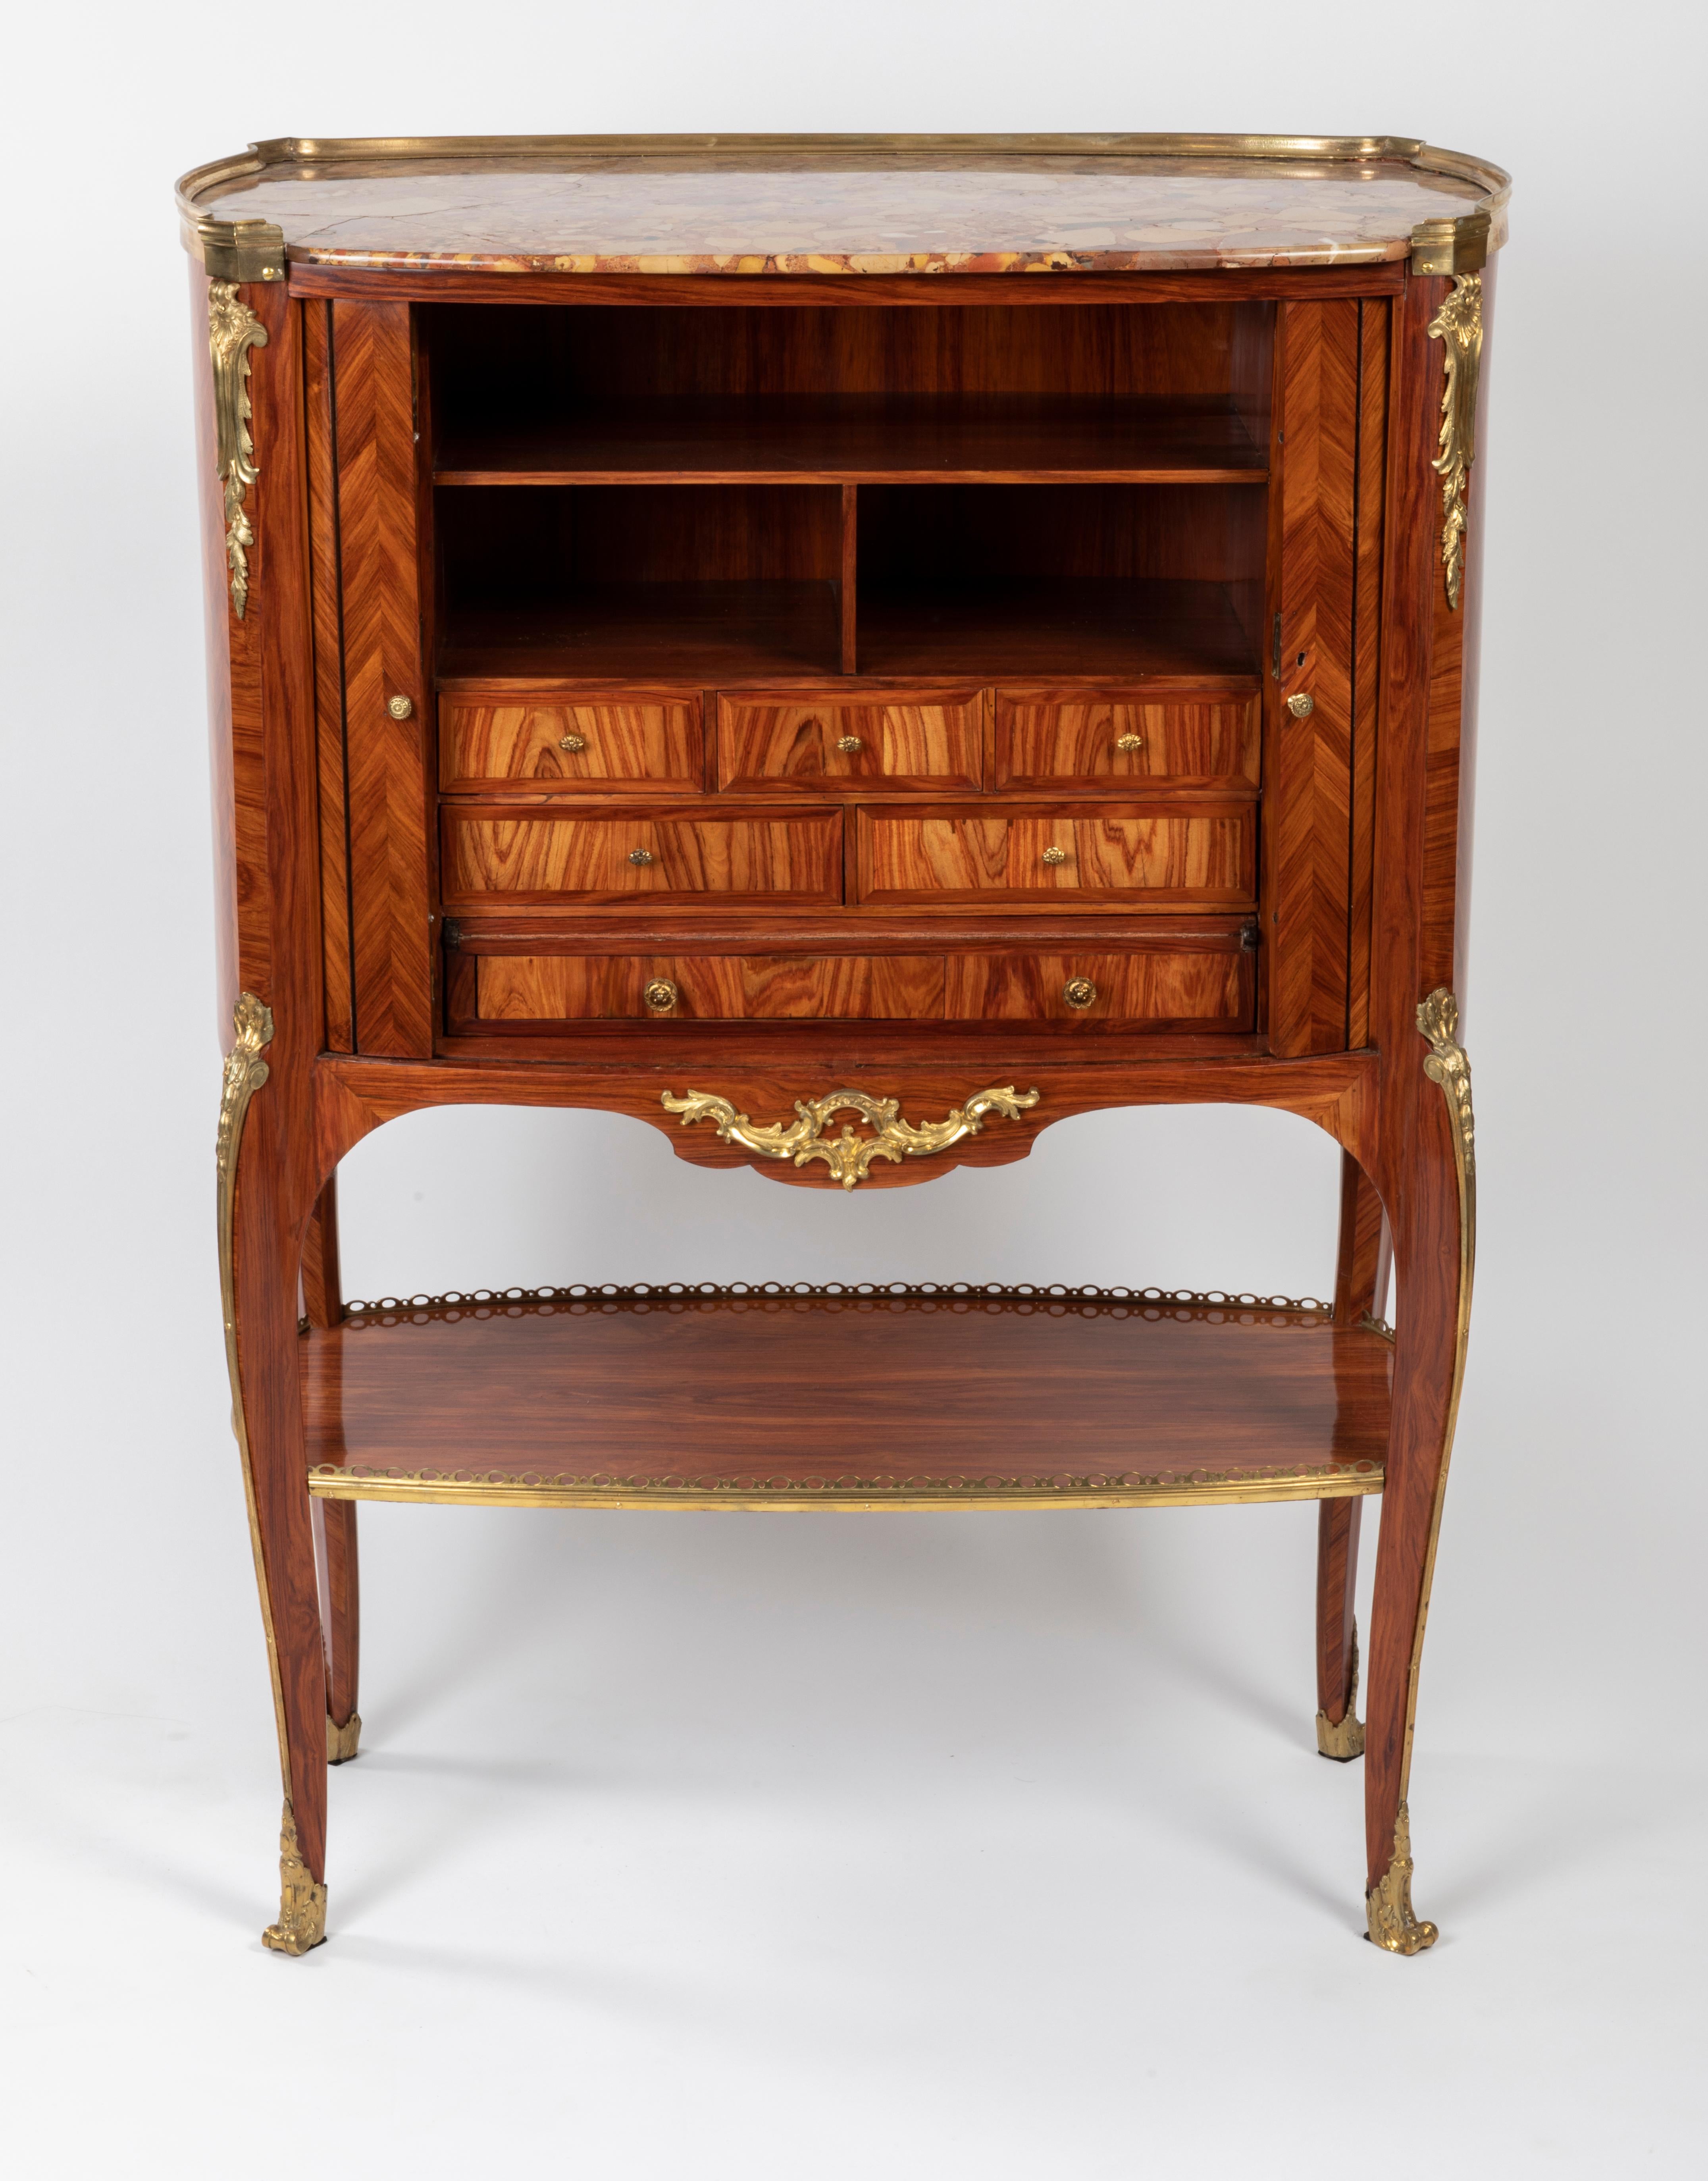 A Louis XV/XVI transitional ormolu mounted tulipwood secretaire by RVLC
Rare and elegant secretary of elliptical shape, veneered on all sides of rosewood with herringbone decoration.
It opens on the front with two sliding slatted curtains